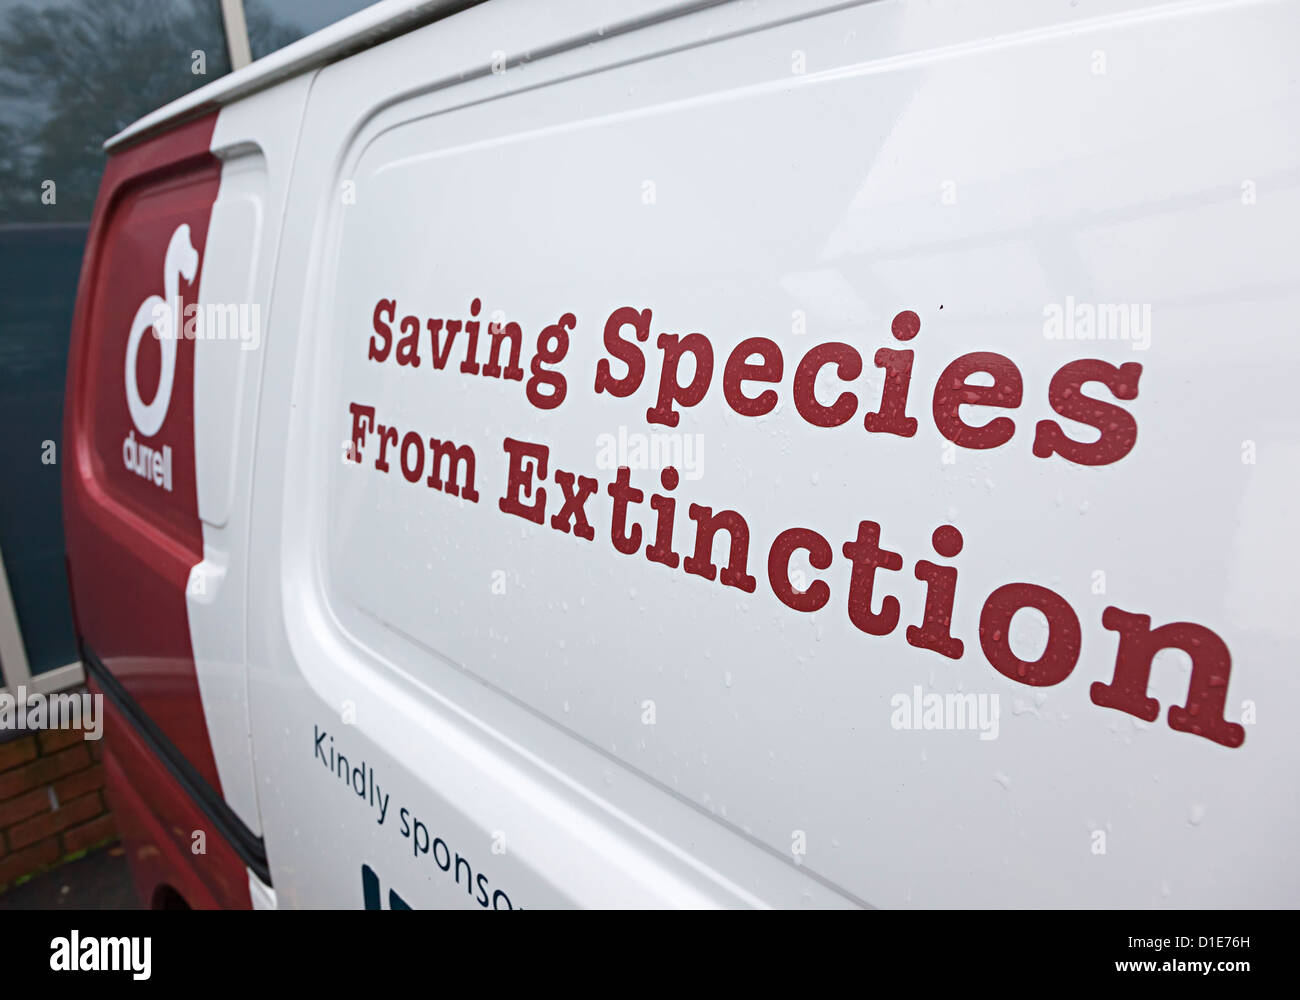 Durrell Wildlife Park logo and motto on side of vehicle, saving species from extinction, Jersey, Channel Islands, UK Stock Photo